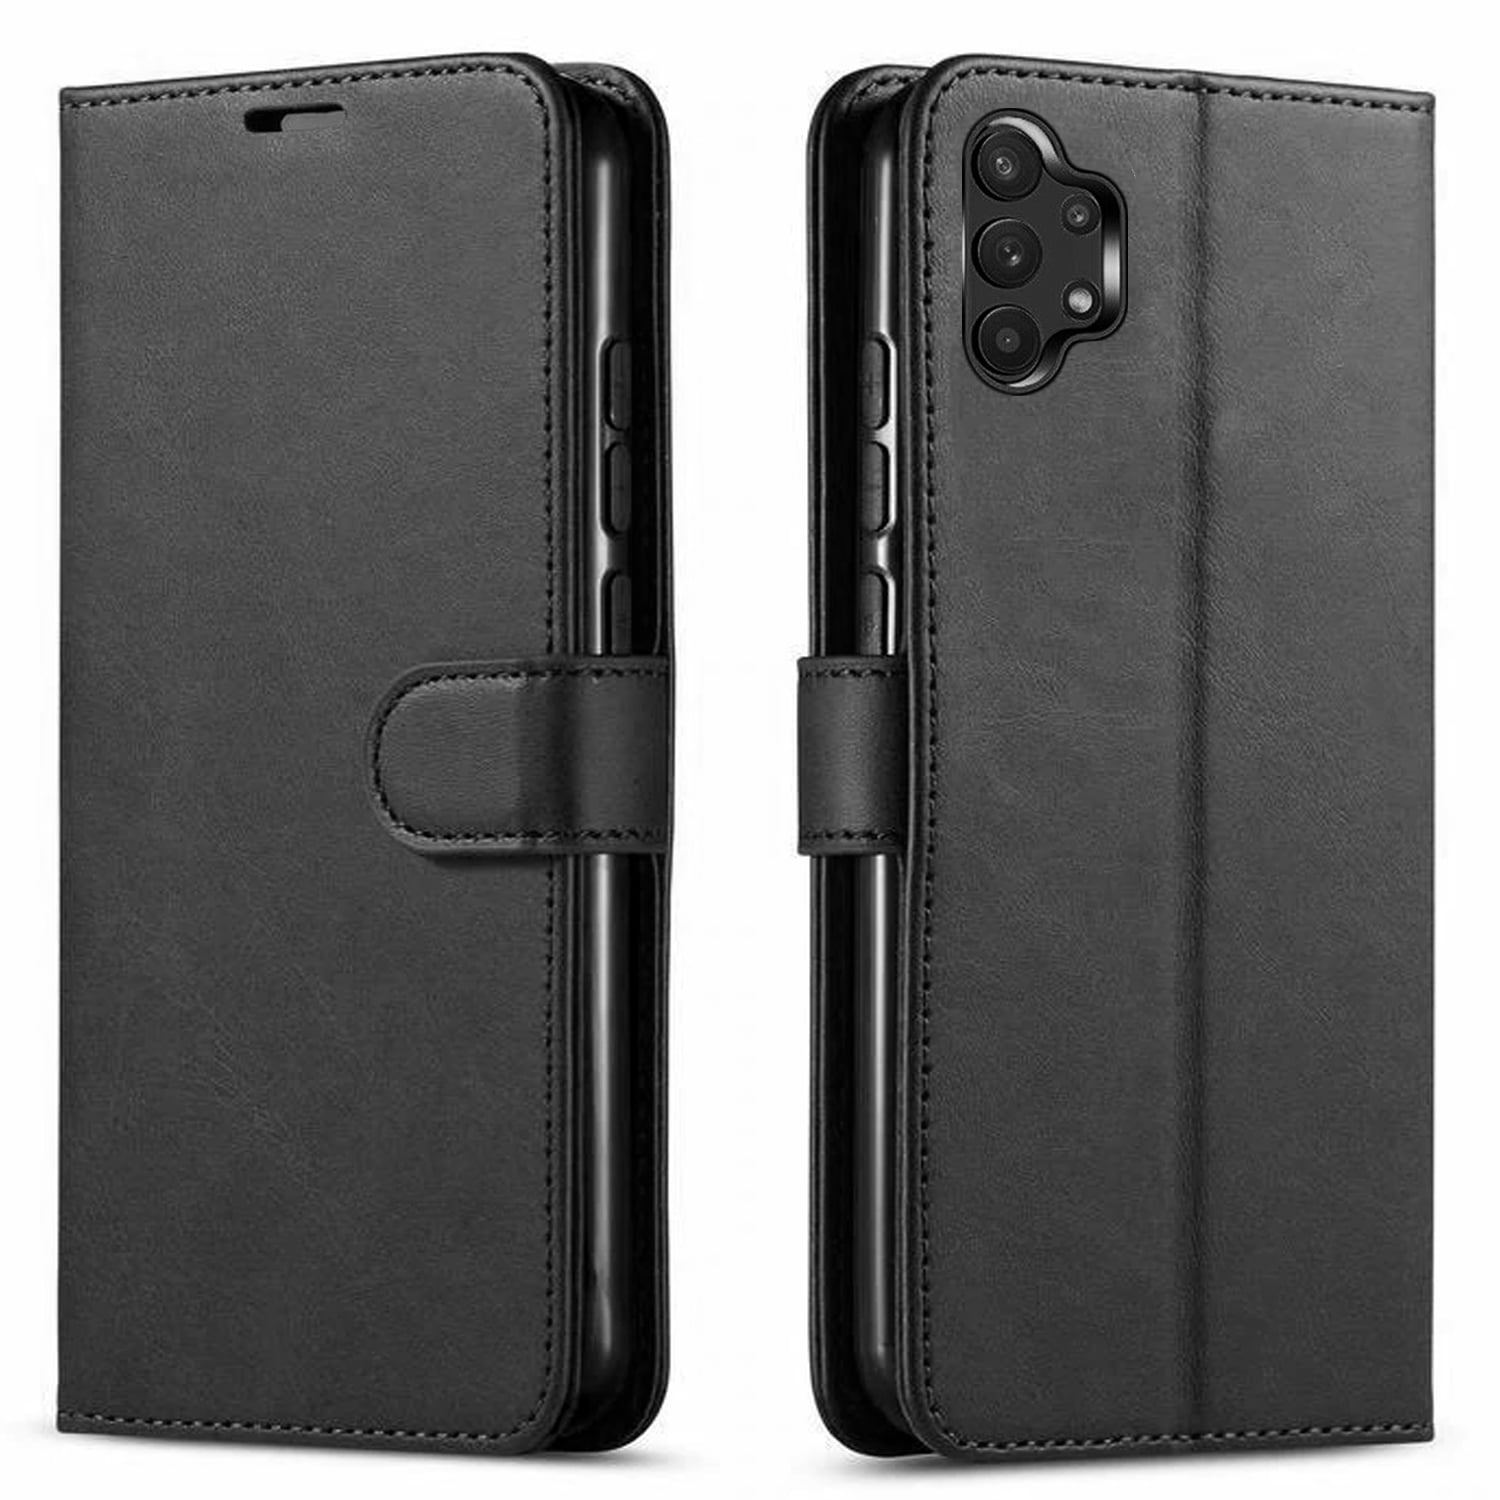 Kickstand Feature Fyy Samsung Galaxy A32 5G Case, Premium PU Leather Flip Wallet Phone Case Protective Cover with Card Holder for Samsung Galaxy A32 5G 6.5 2021 Black